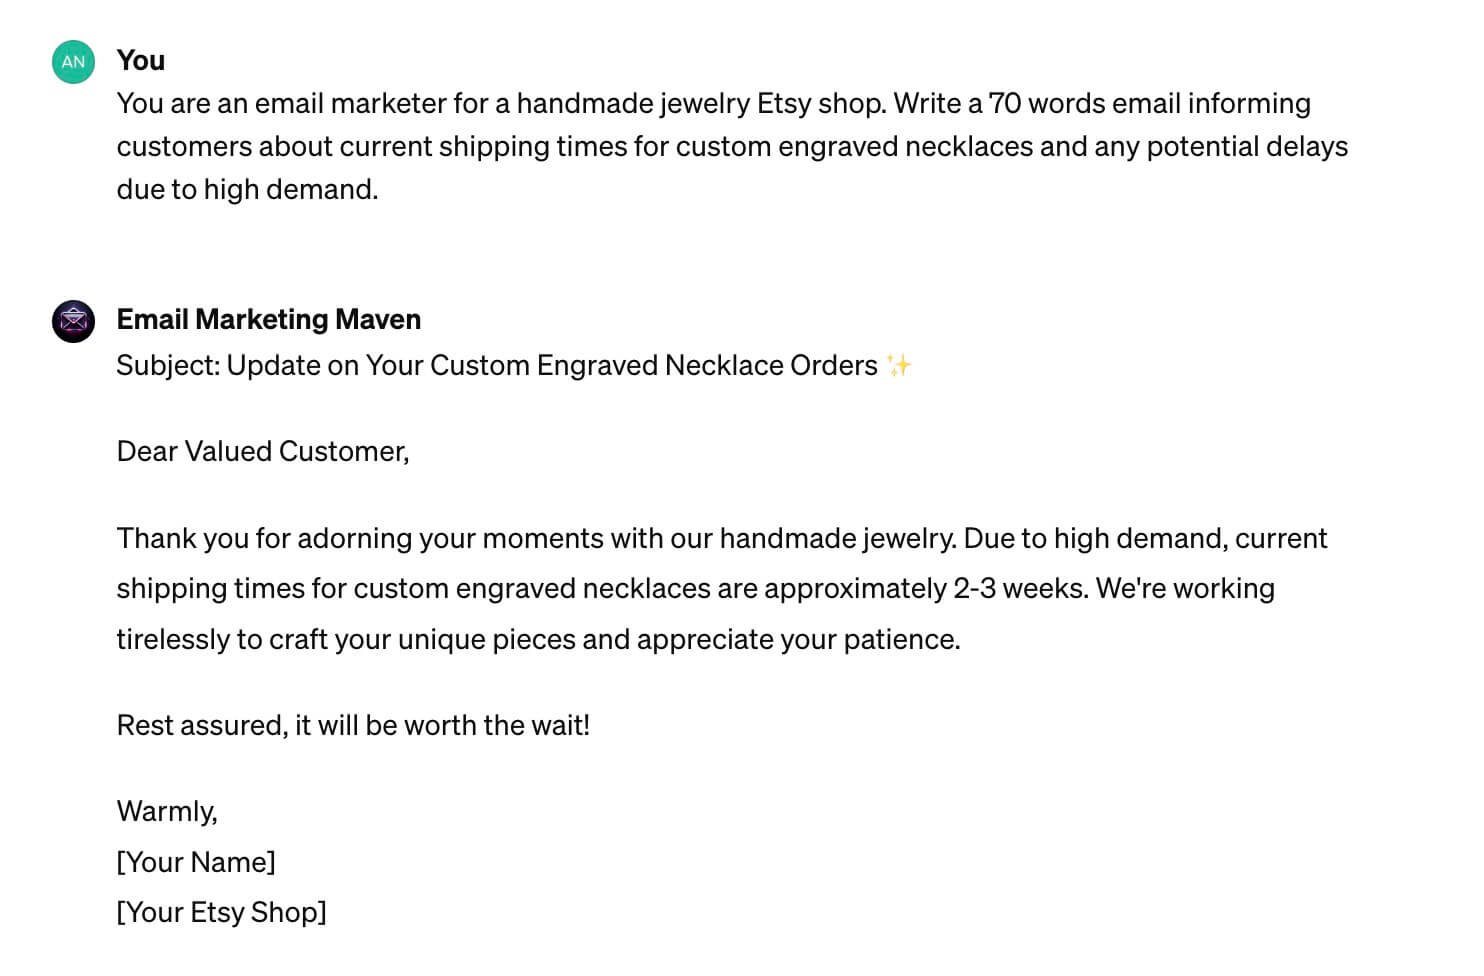 Example of an email prompt to inform customers about shipping times and potential delays for custom engraved jewelry